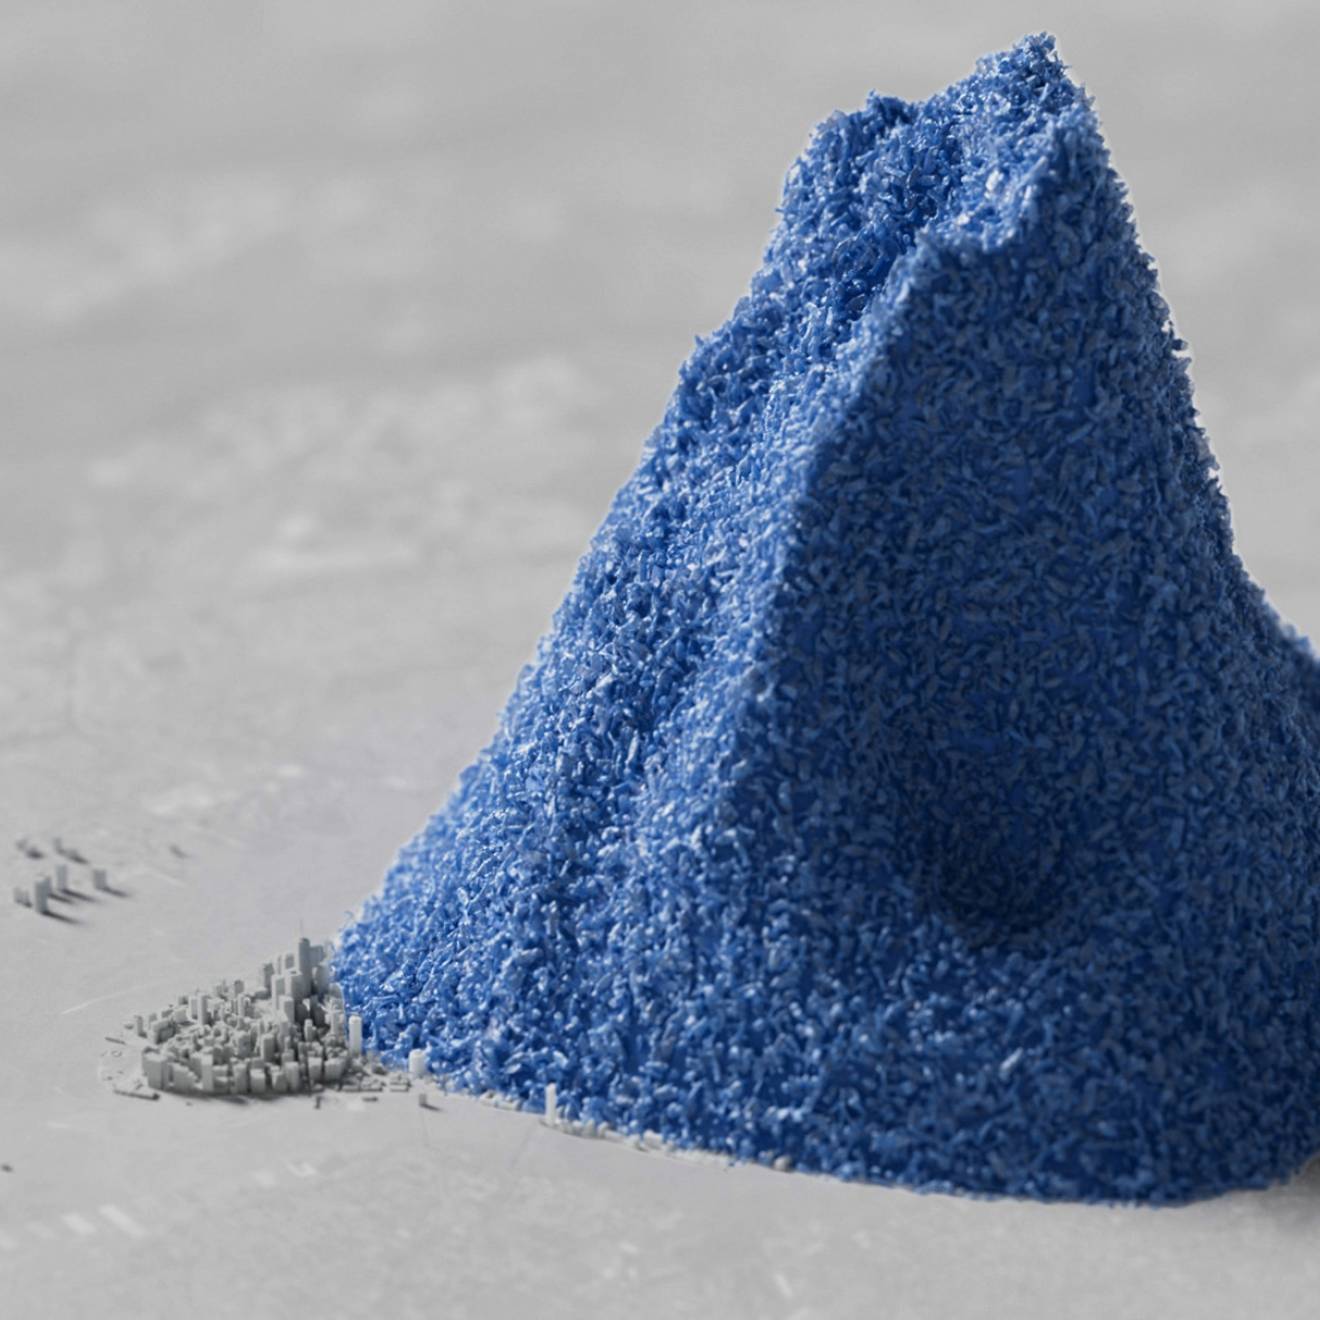 A computer-generated image of a pile of blue plastic beads dwarfing a colorless 3D rendering of Manhattan